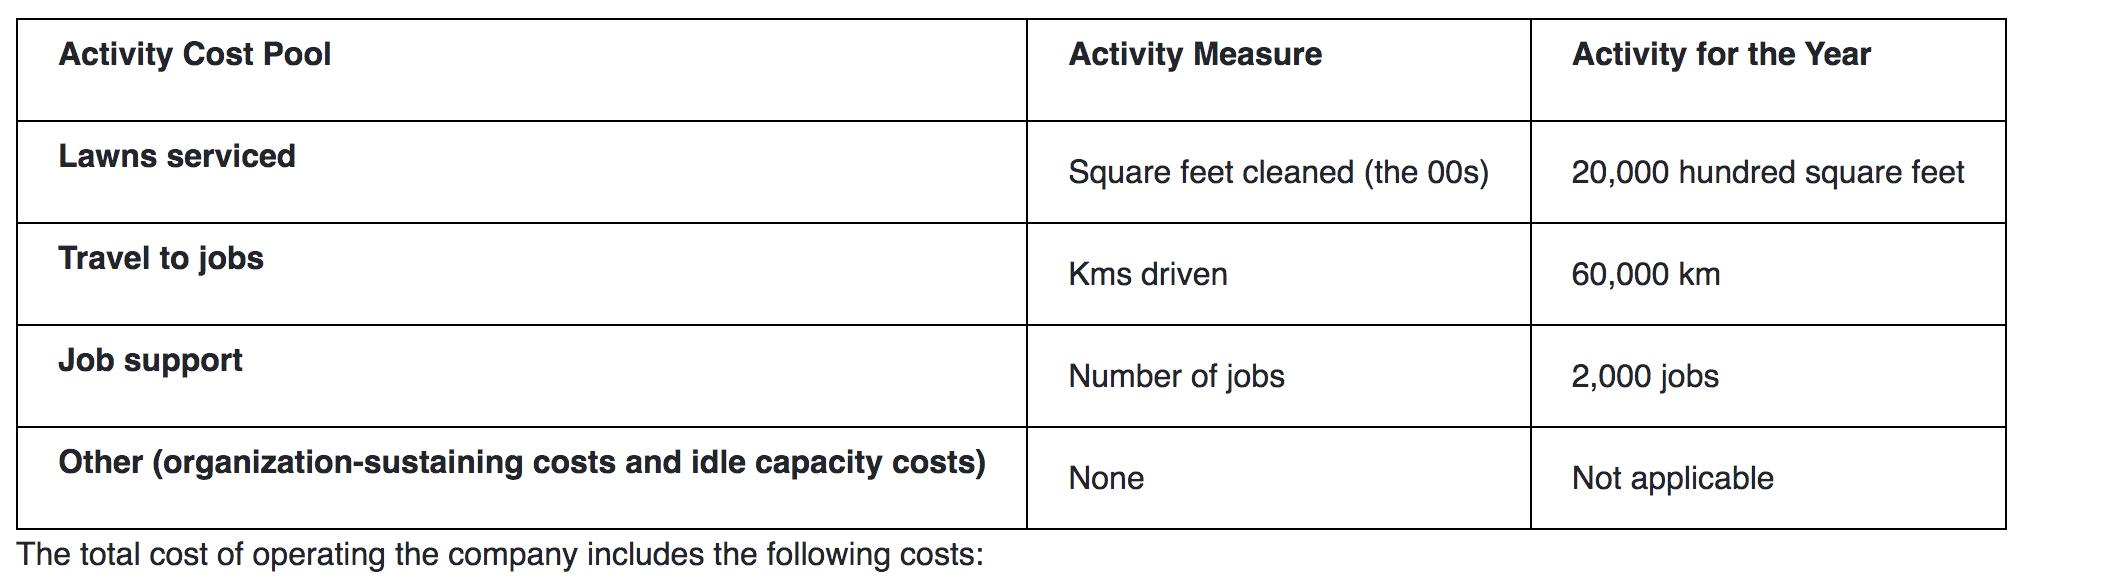 Activity Cost Pool Activity Measure Activity for the Year Lawns serviced Square feet cleaned (the 00s) 20,000 hundred square